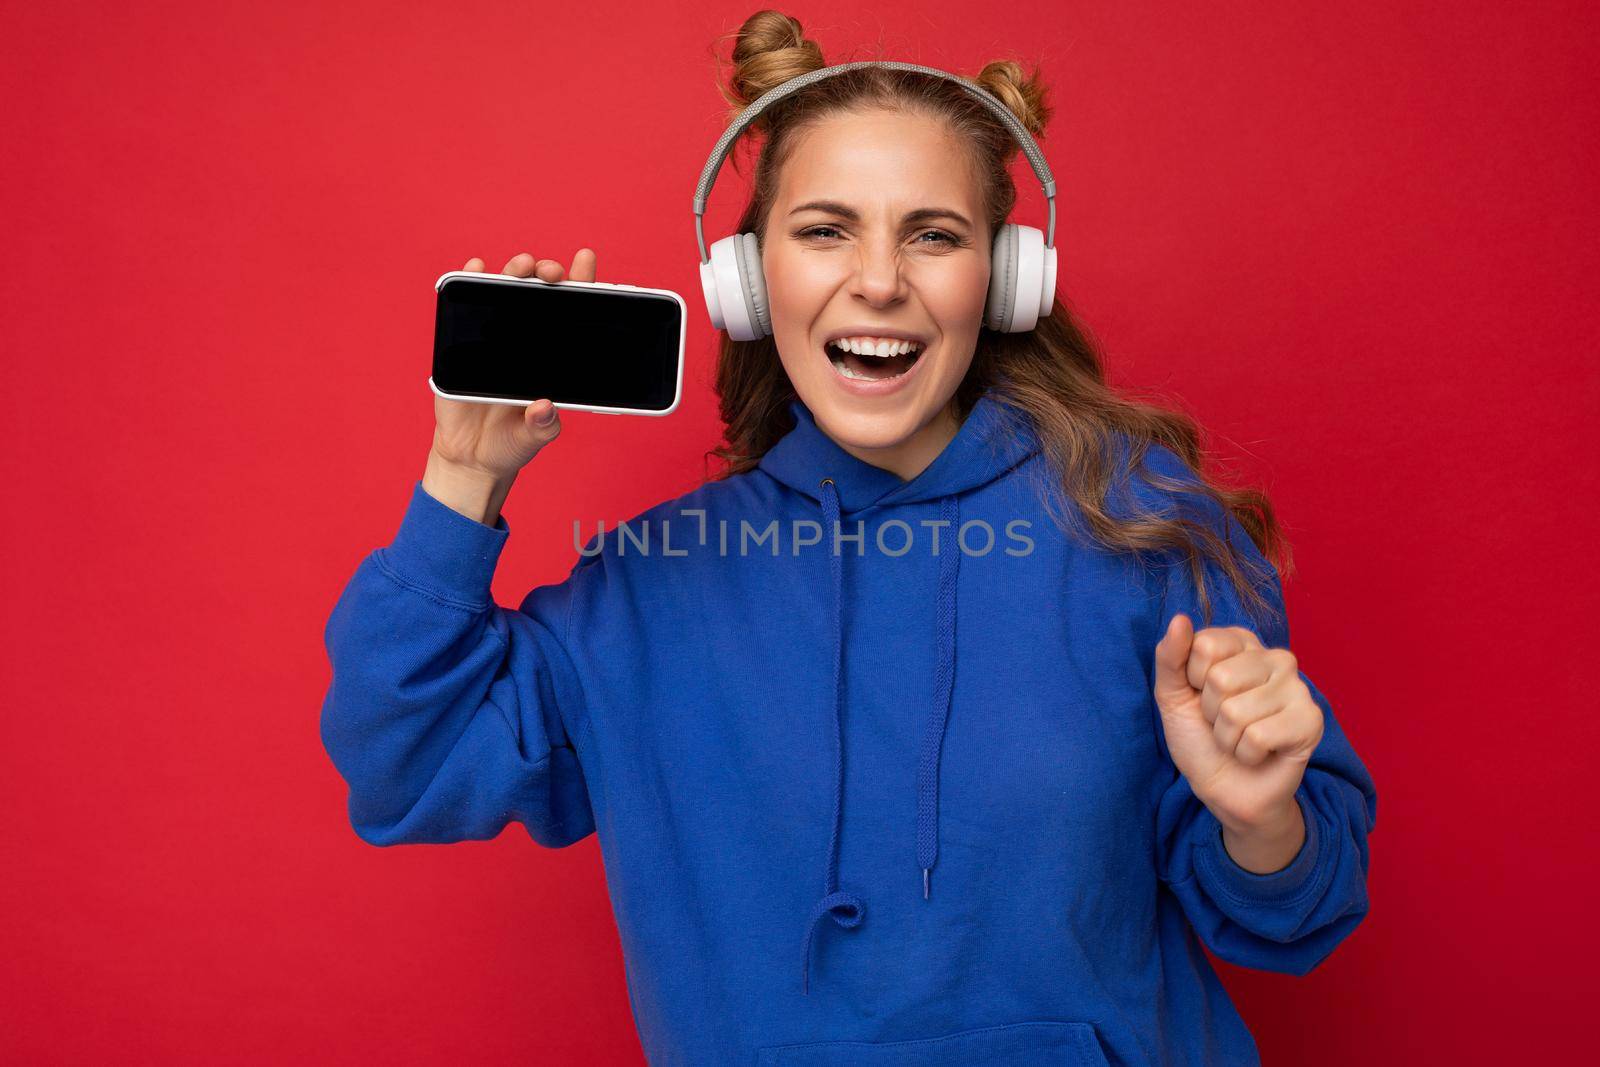 Beautiful happy smiling young woman wearing stylish casual outfit isolated on background wall holding and showing mobile phone with empty display for mockup wearing white bluetooth headphones listening to music and having fun looking at camera by TRMK